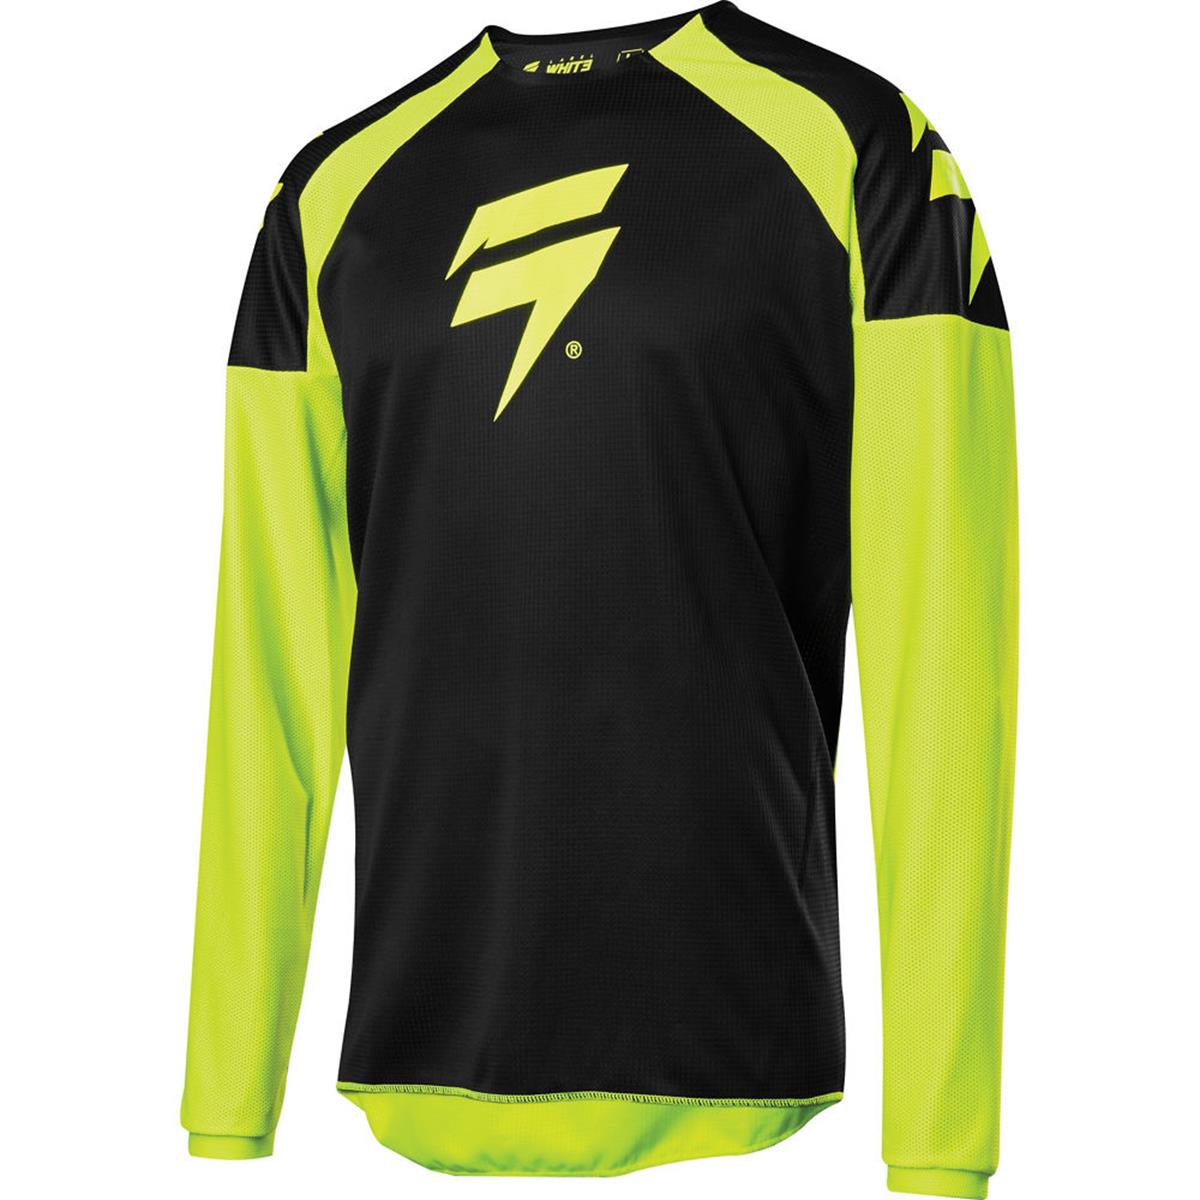 Shift Jersey Whit3 Label Fluo Gelb